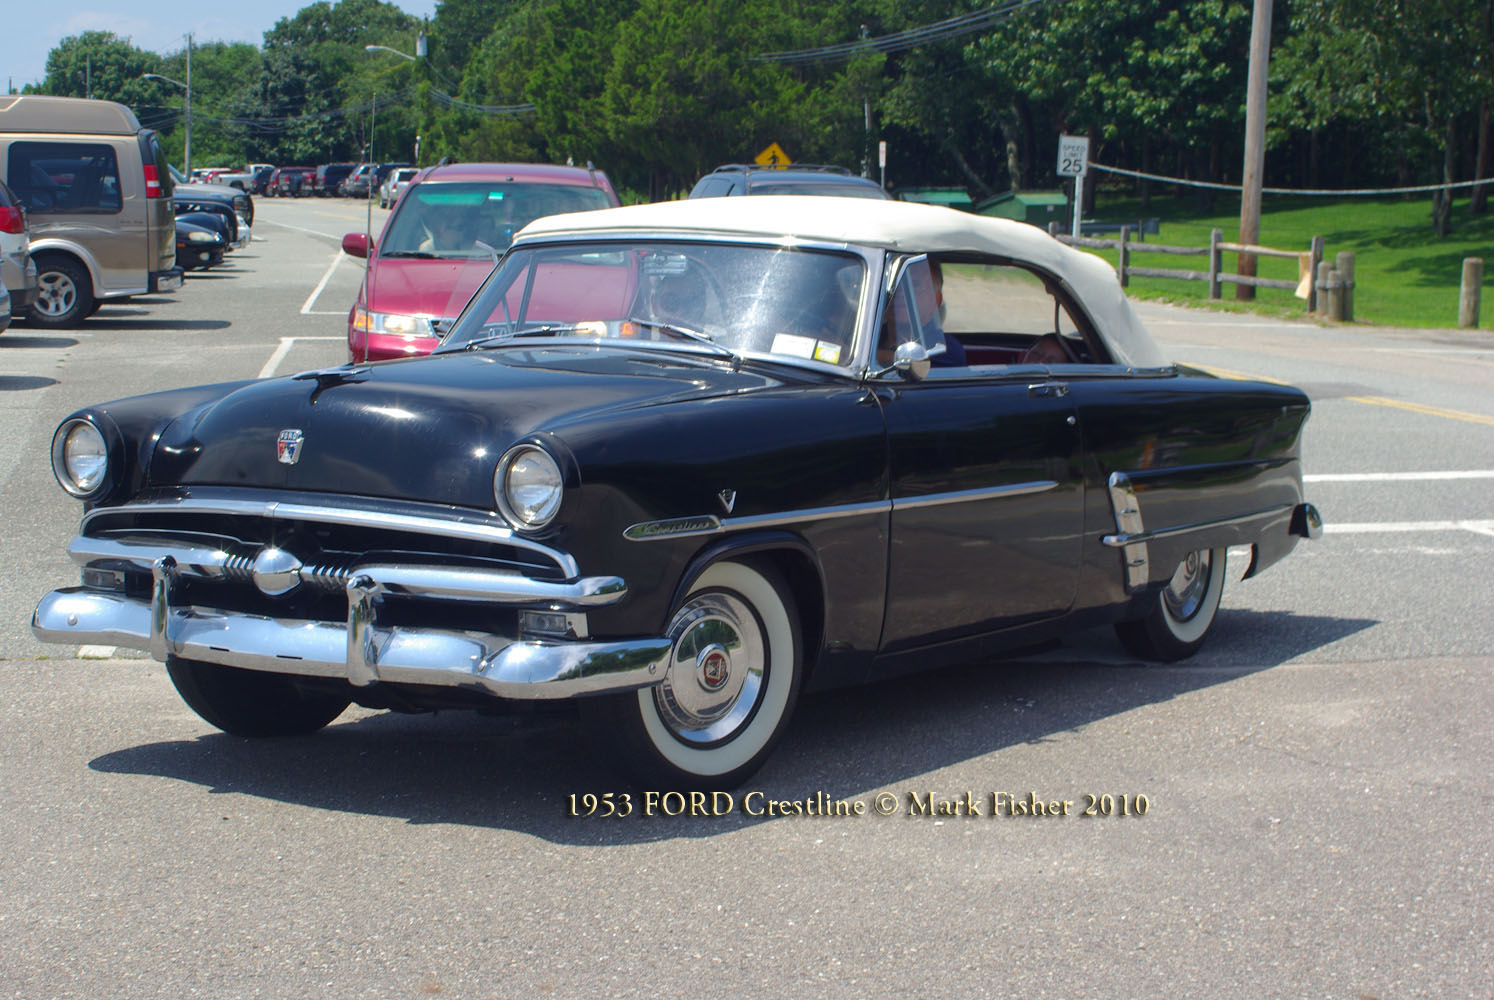 1953 Ford Crestline Sunliner Convertible Pics, Vehicles Collection